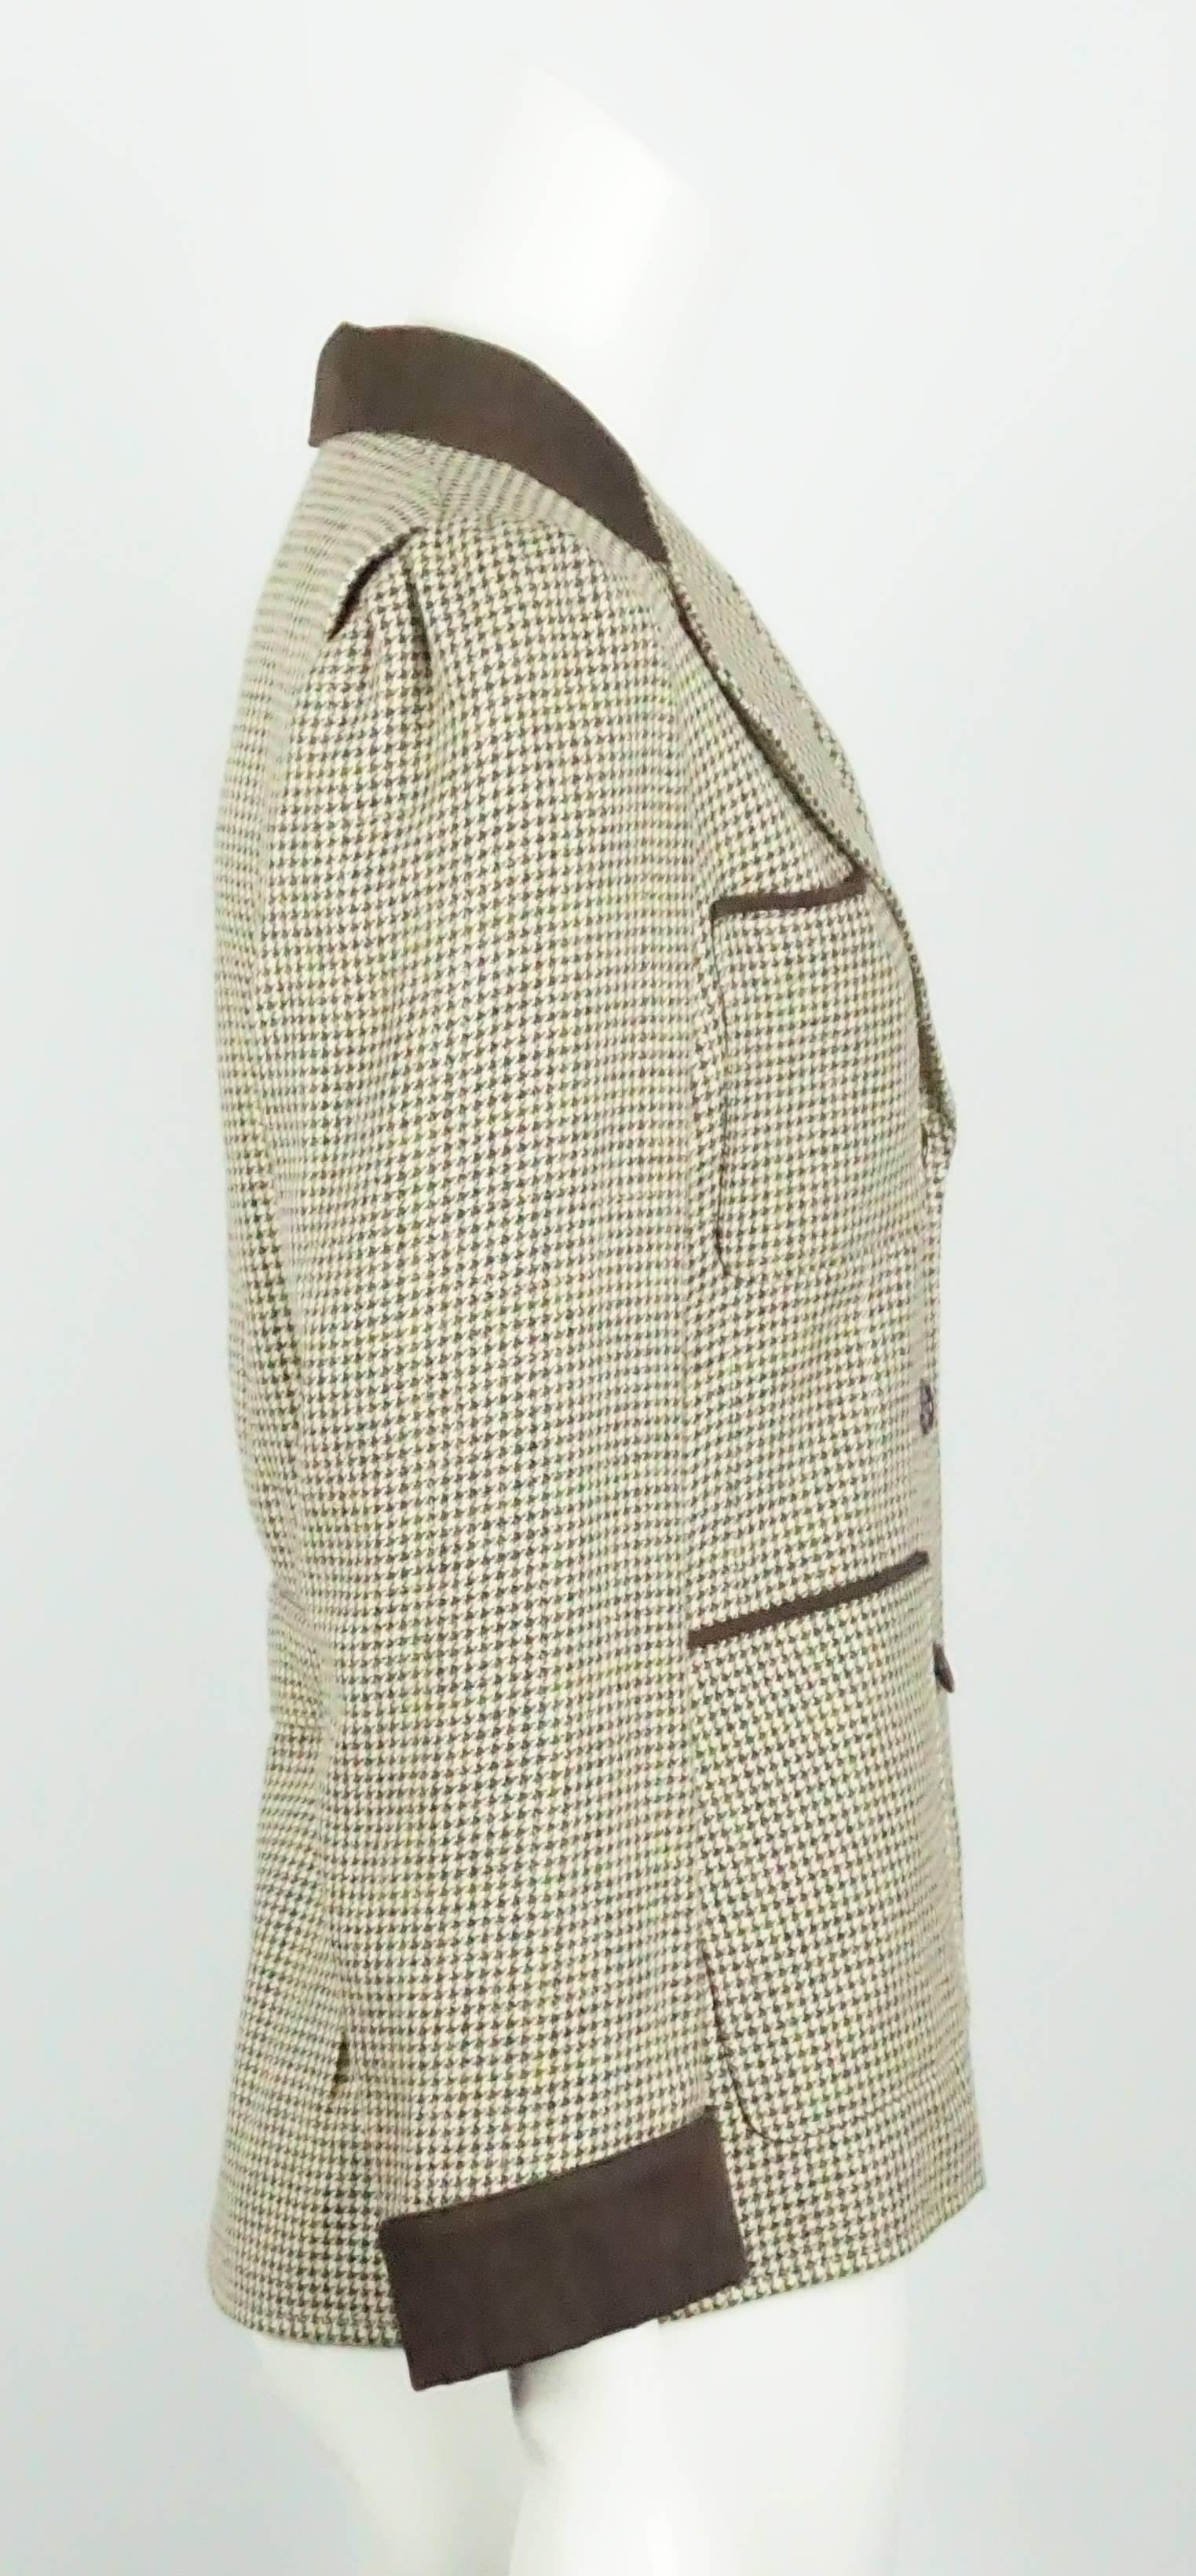 Yves Saint Laurent Earthtone Houdstooth 4 Pocket Wool Jacket - 40 - 70's  This timeless classic is perfect for any wardrobe. The jacket is in excellent vintage condition. The wool fabric is a brown and Ivory houndstooth with a hint of dark green. It